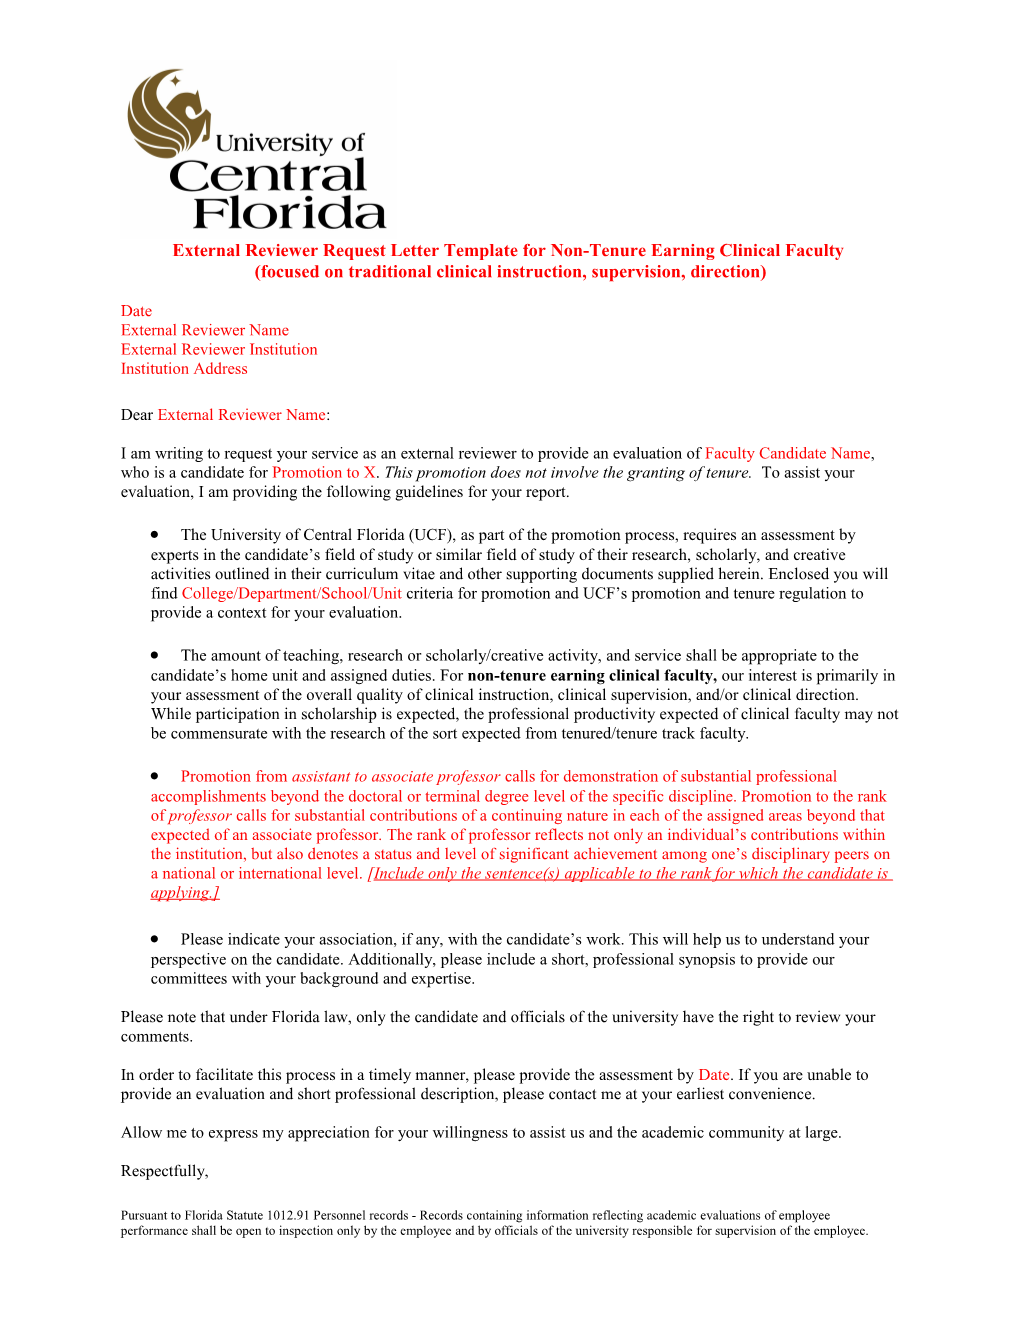 External Reviewer Request Letter Template for Non-Tenure Earning Clinical Faculty (Focused